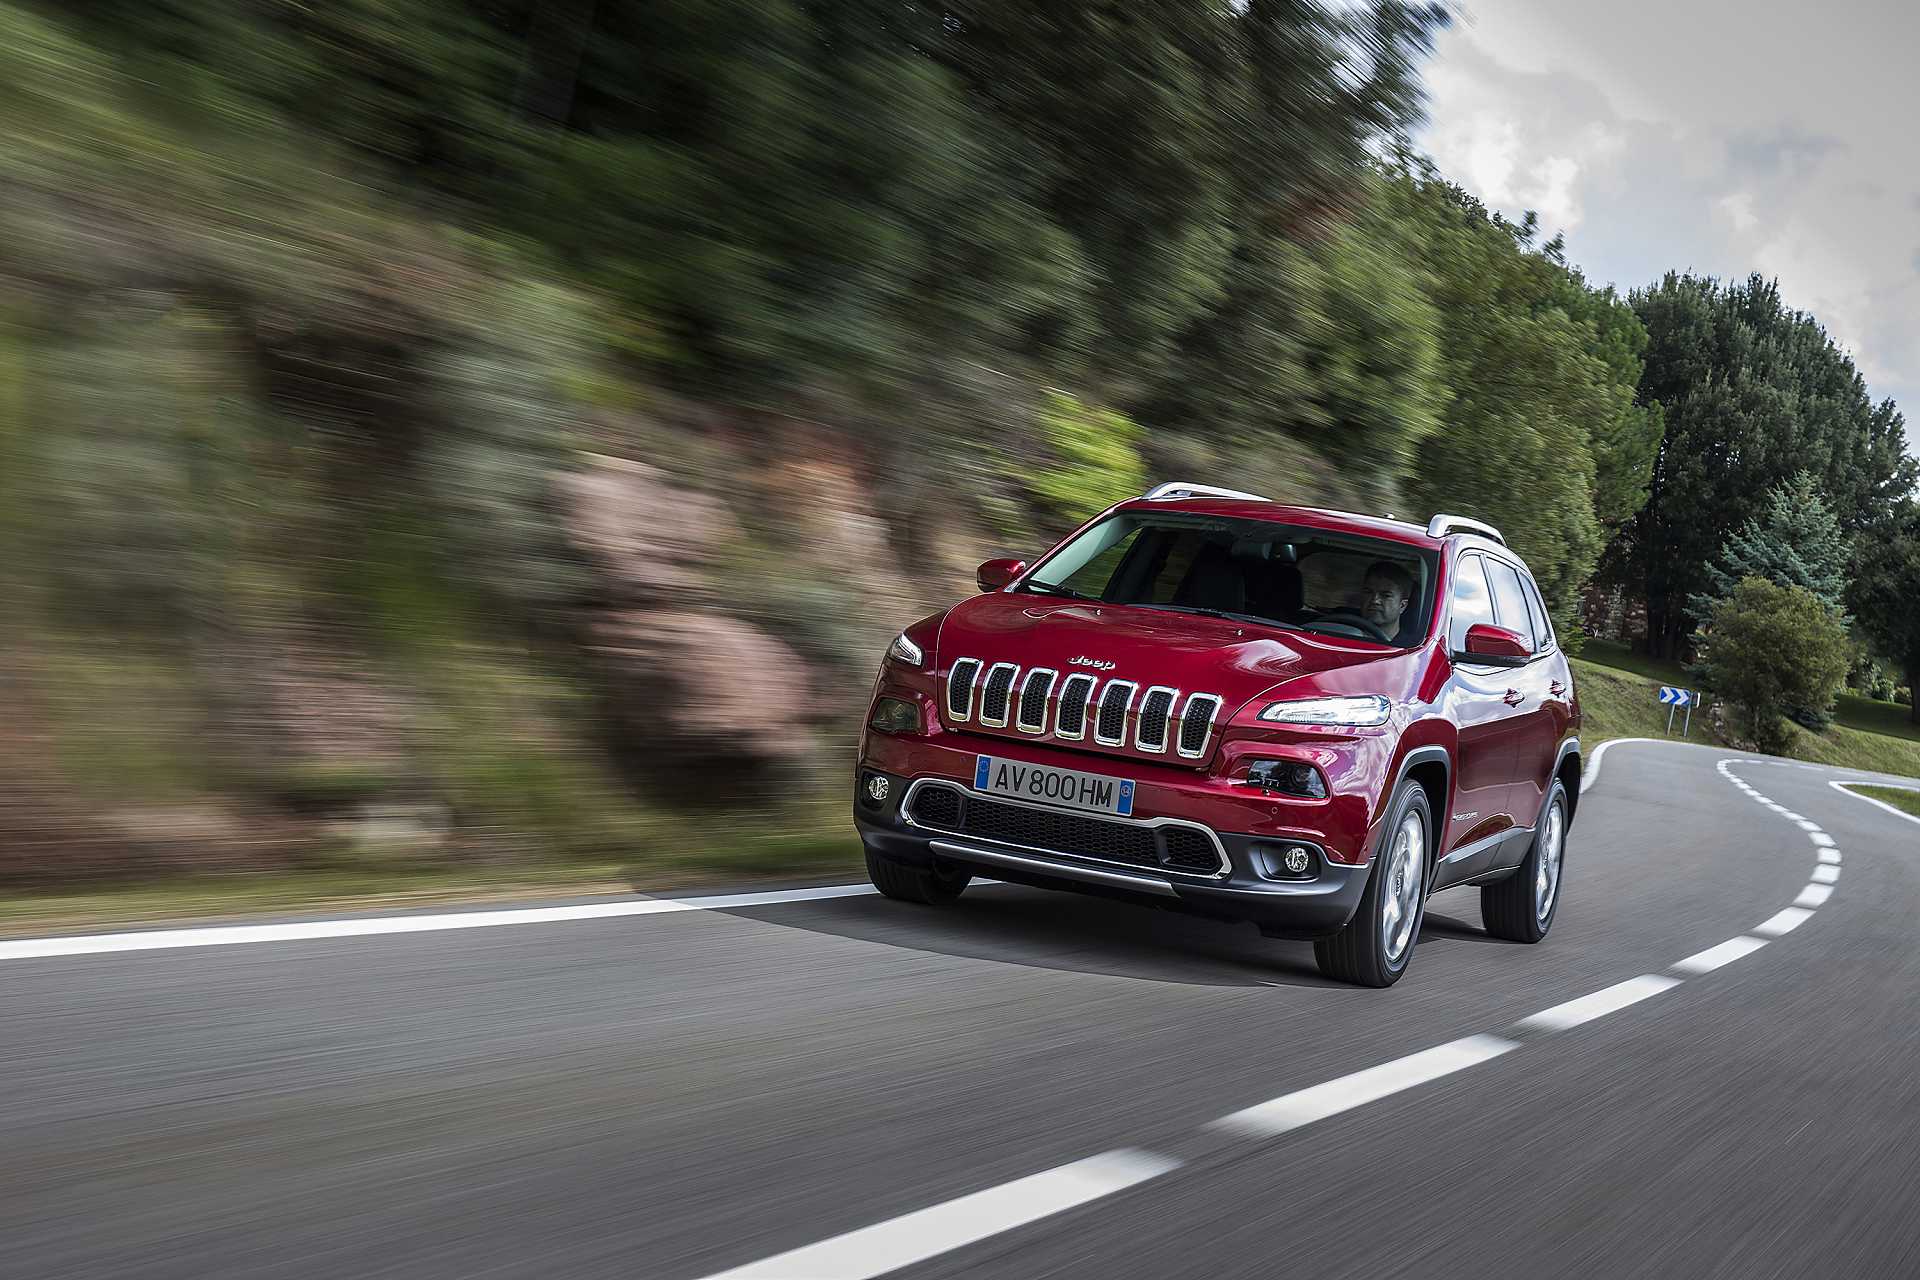 Fichiers Tuning Haute Qualité Jeep Cherokee 2.4  186hp